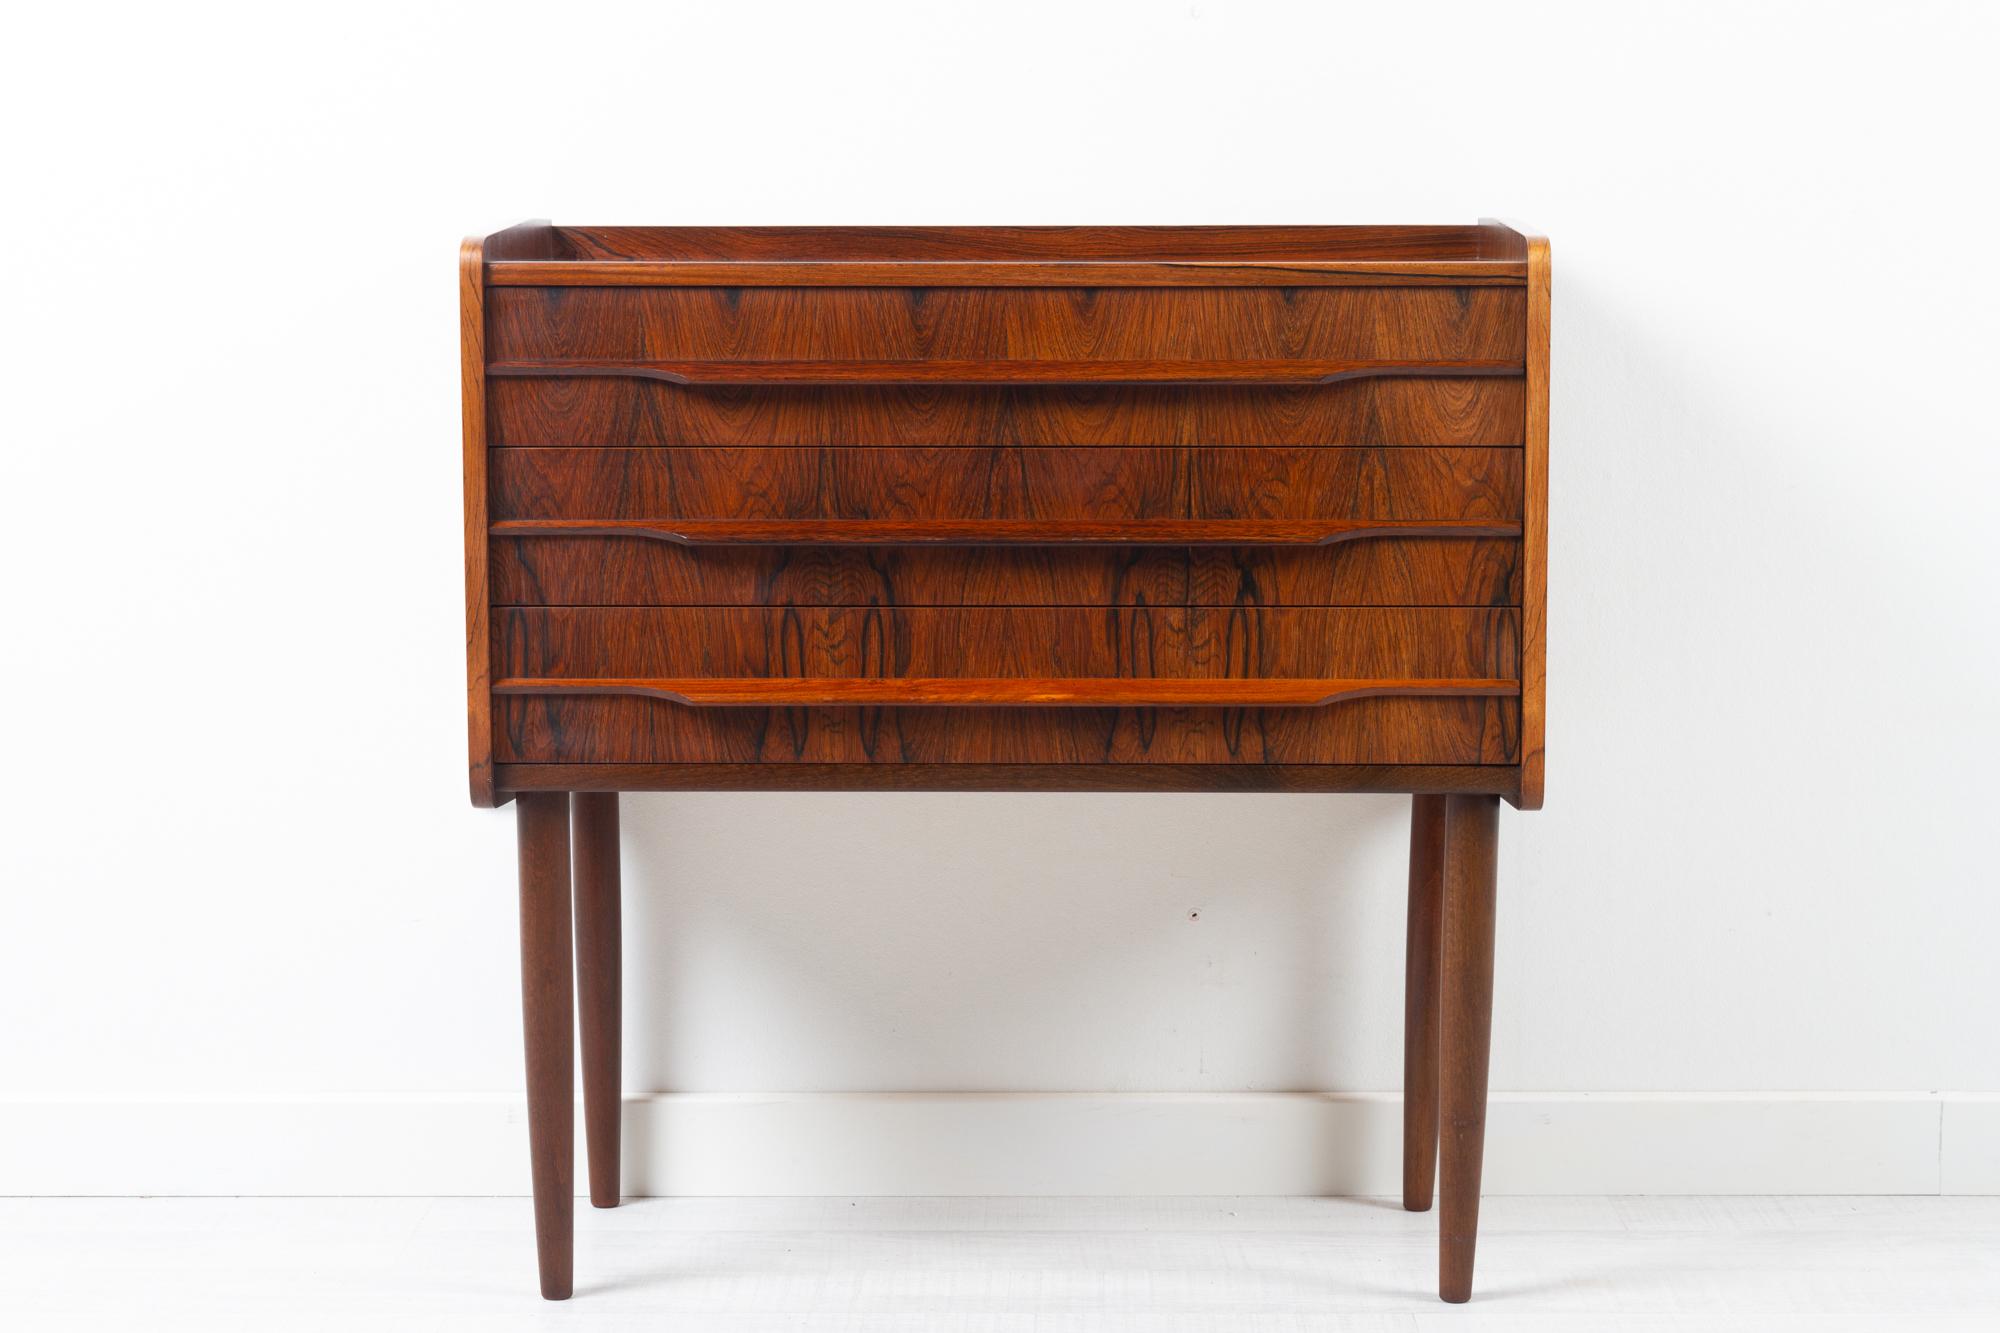 Vintage Danish rosewood dresser 1960s
Small Danish Mid-Century Modern dresser in beautiful expressive Rosewood veneer. 
Three wide drawers with long sculpted pulls in solid Rosewood. Drawers has dovetail joints and are lined with green felt.